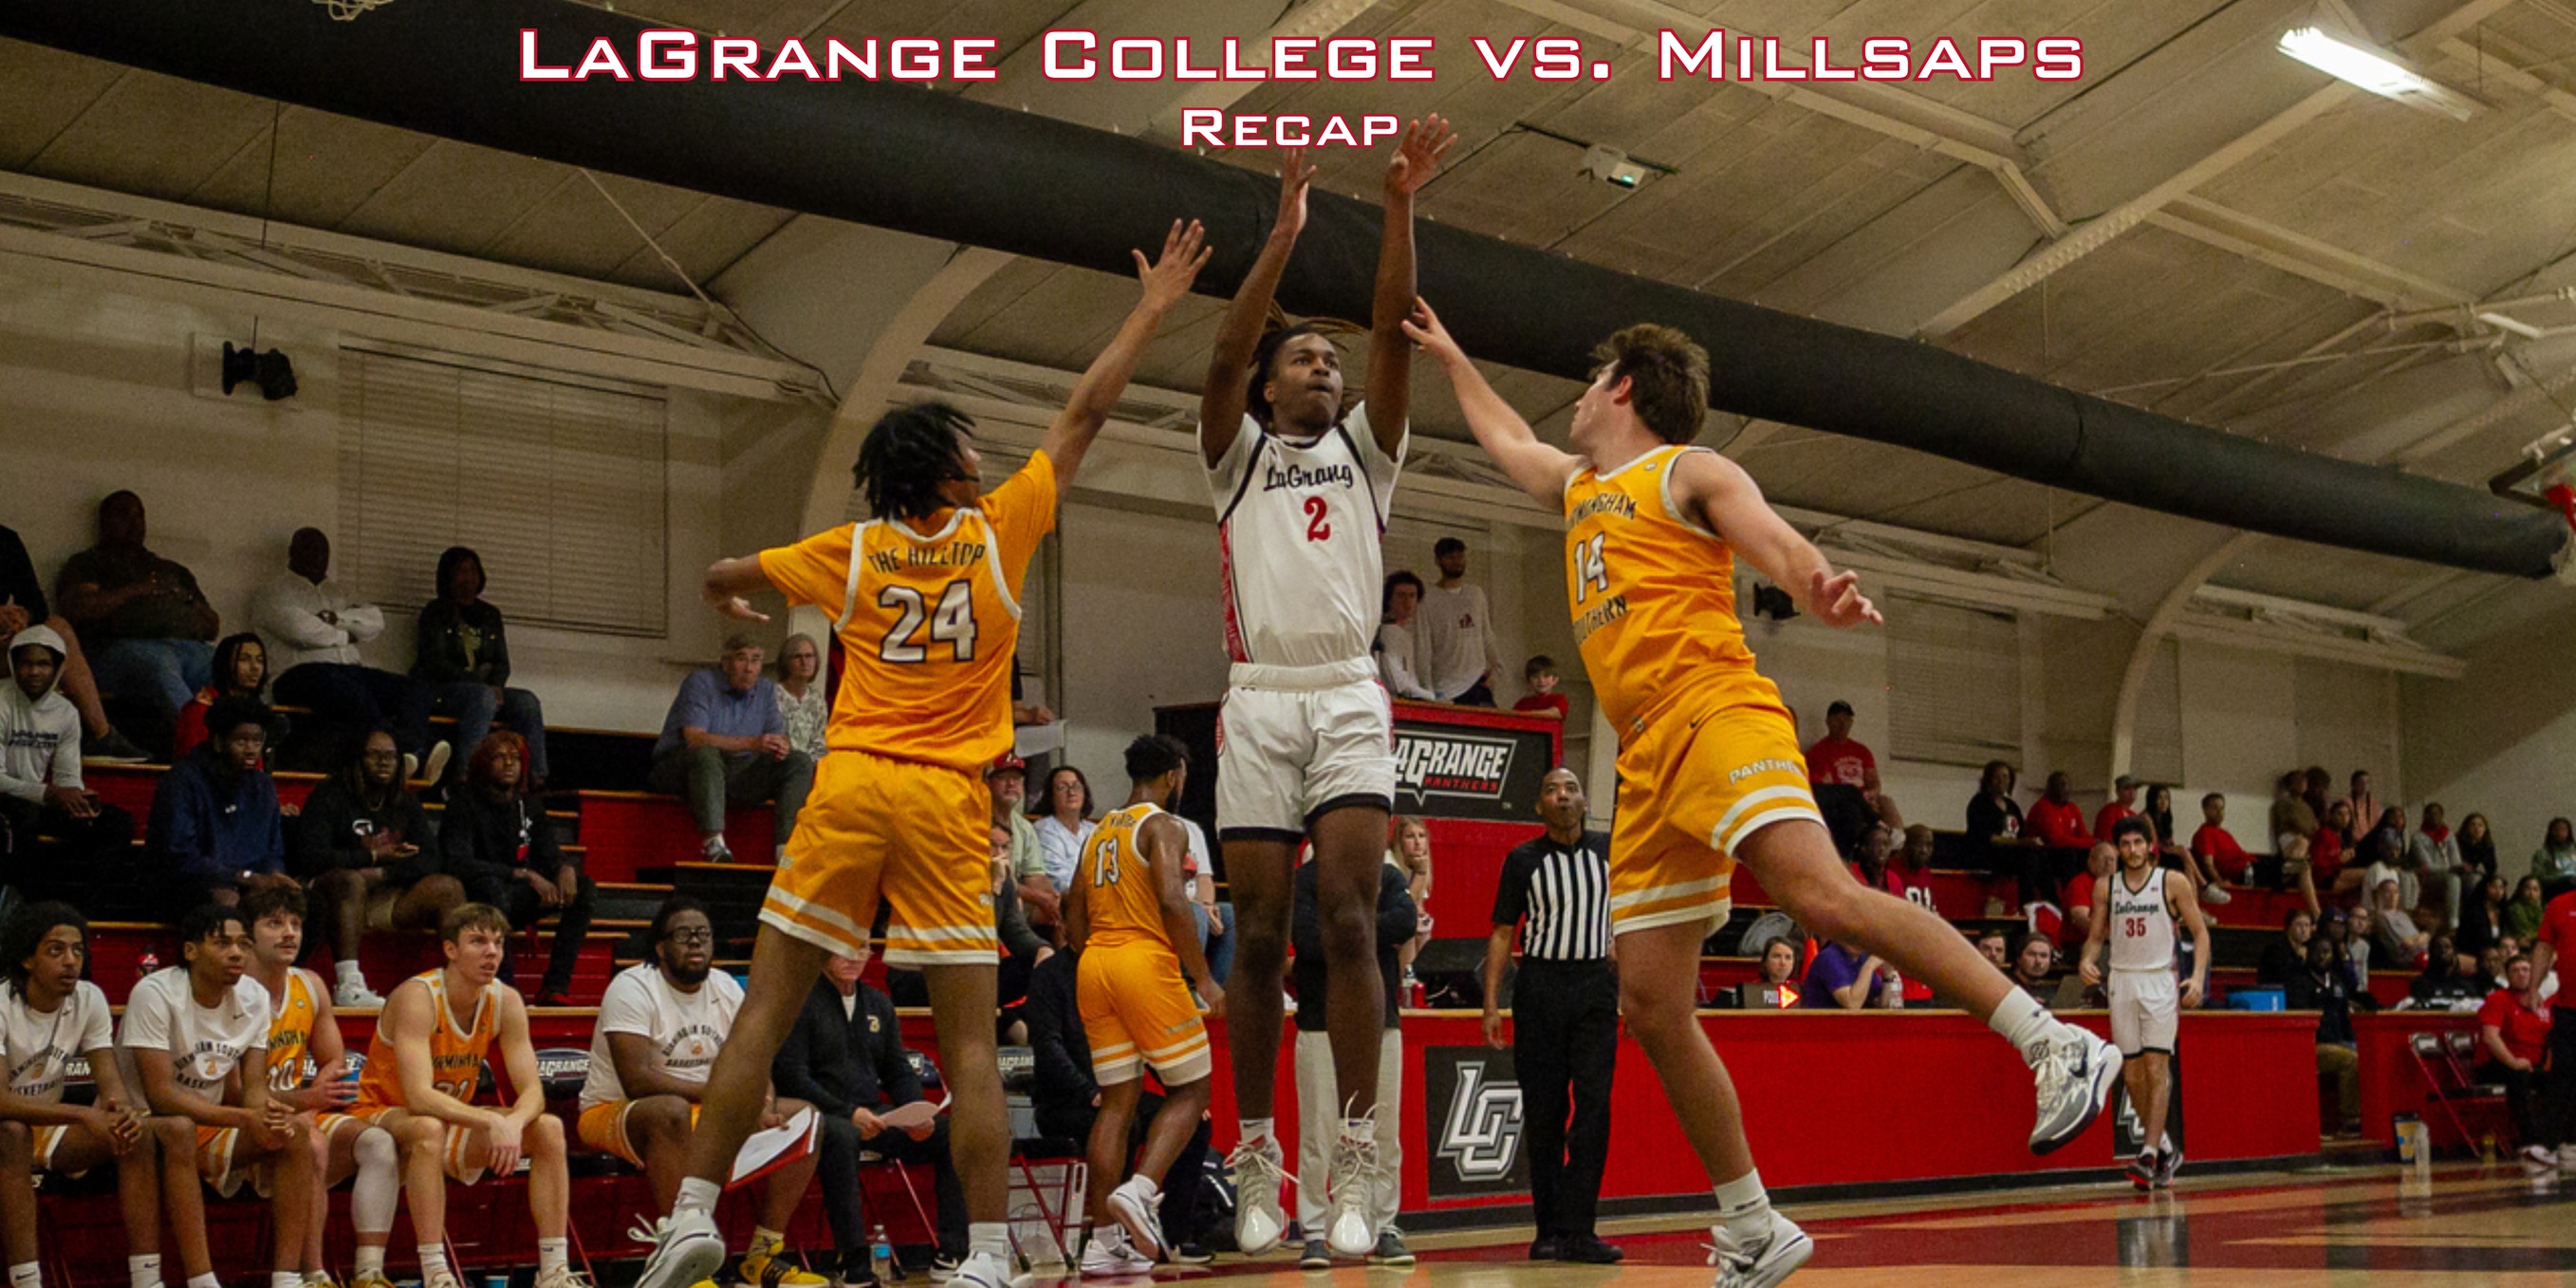 The Panthers start the season 2-0 after blowing by Millsaps College